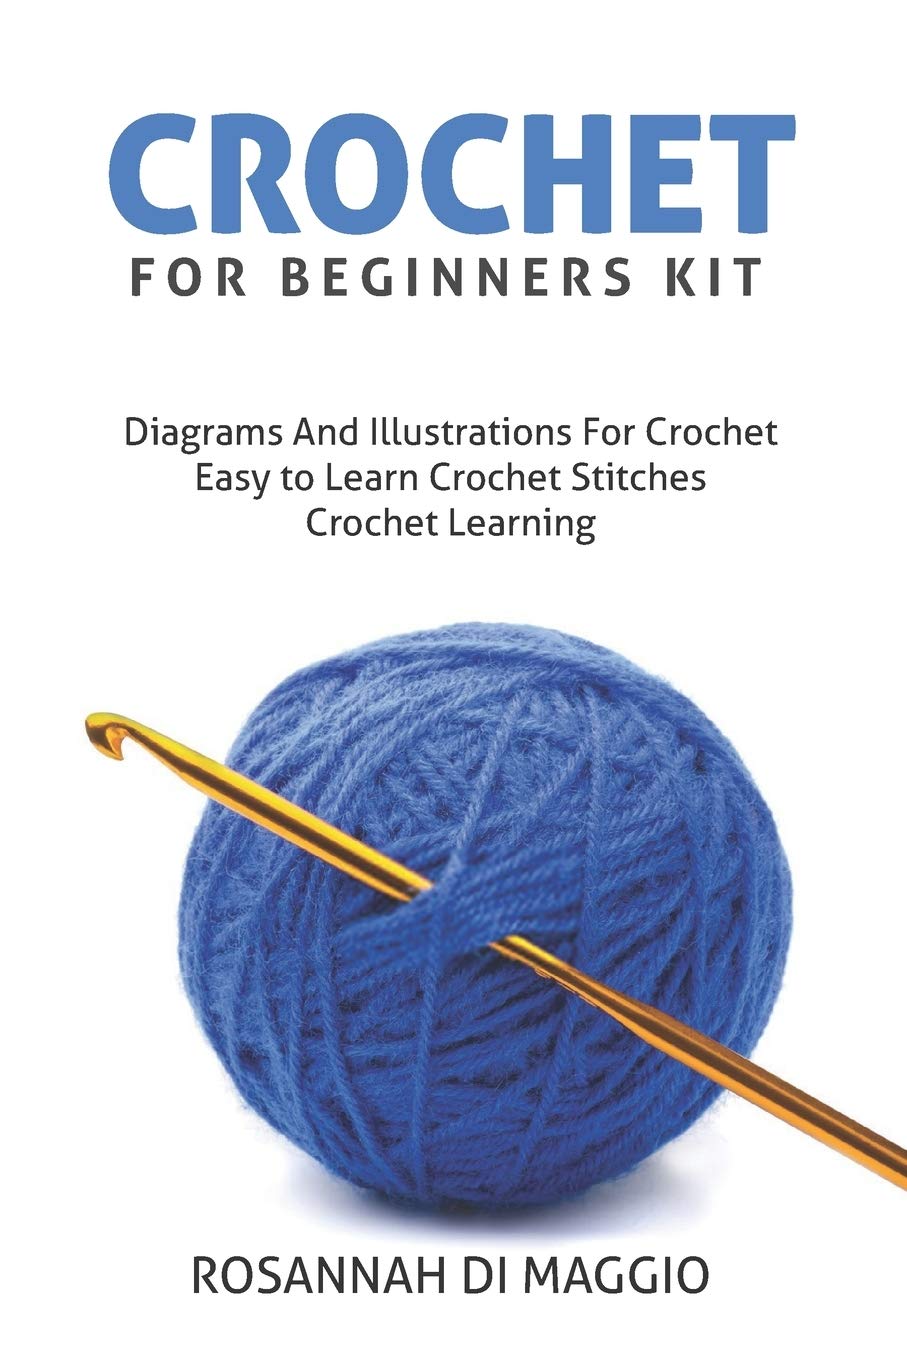 Crochet for Beginners Kit by Rosannah DiMaggio - Knot Just Yarn